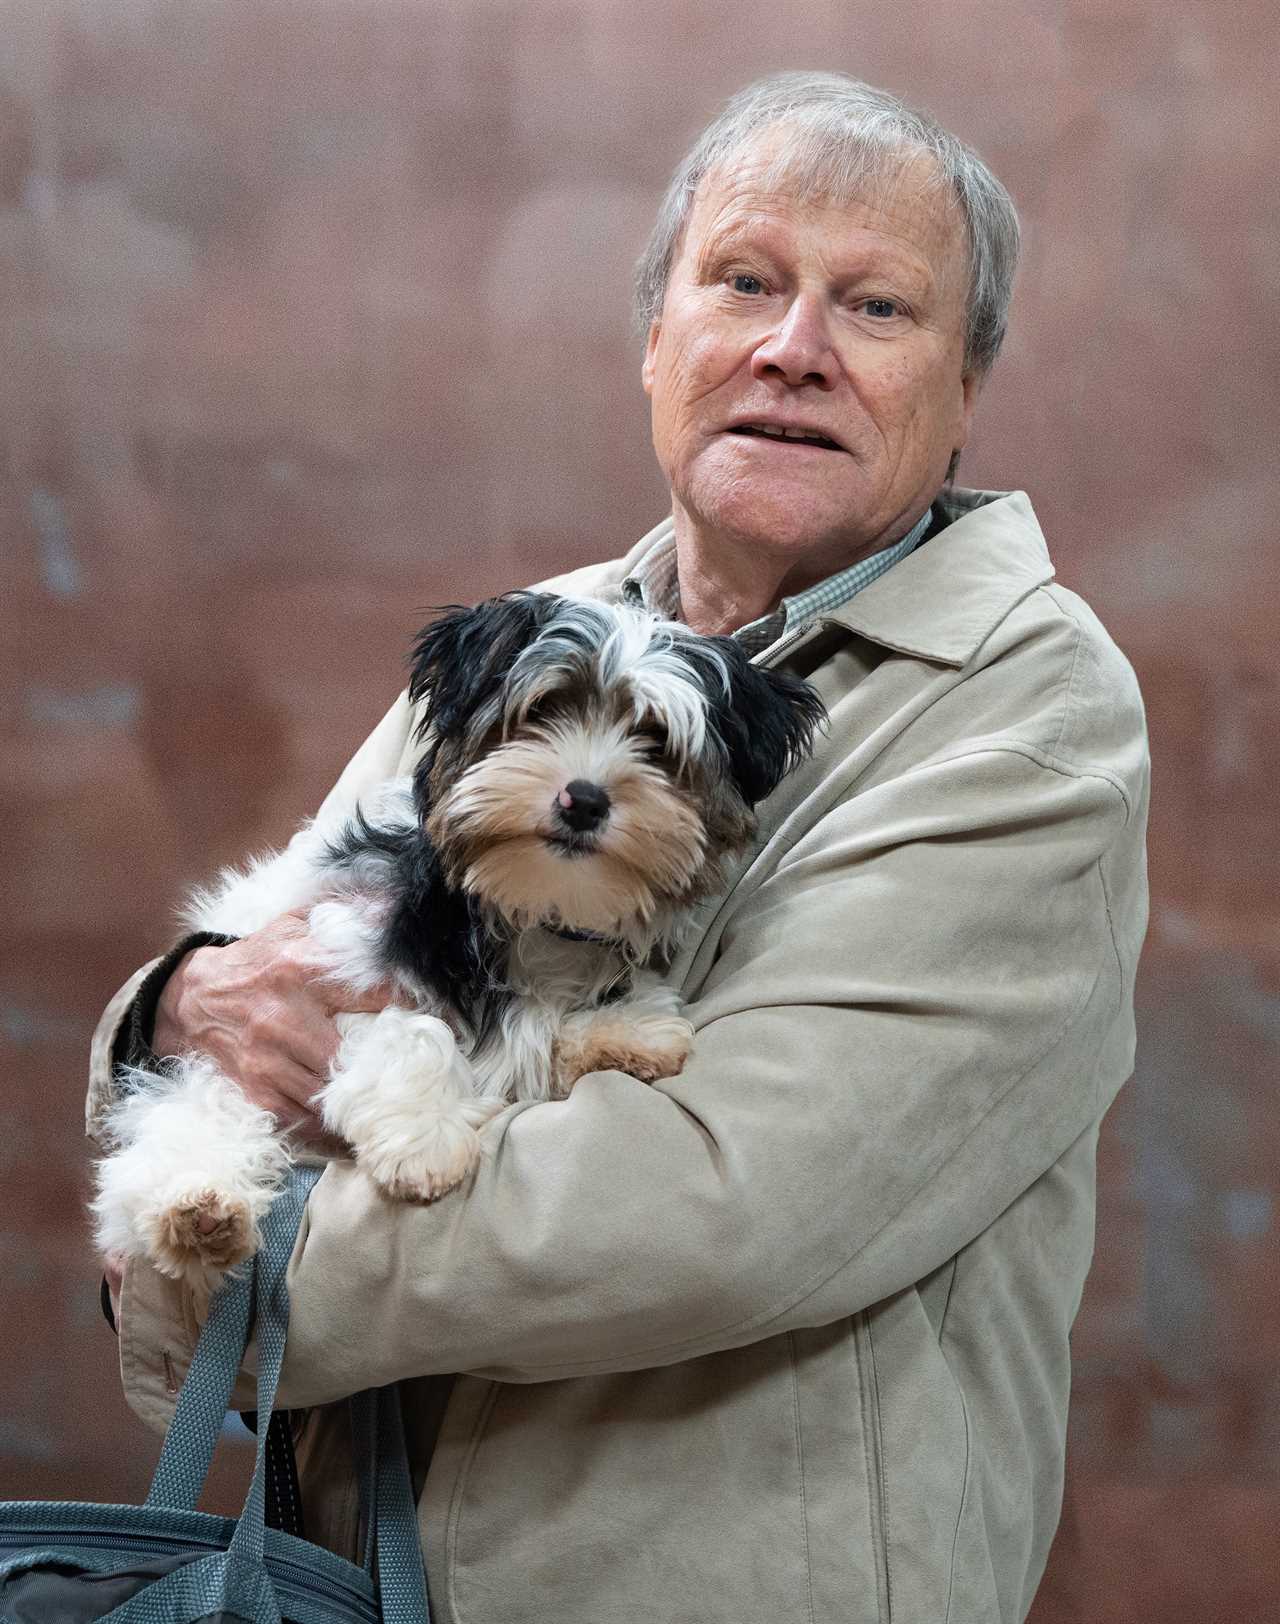 Coronation Street Fans Furious Over Cruelty Scene Involving Roy Cropper's Dog